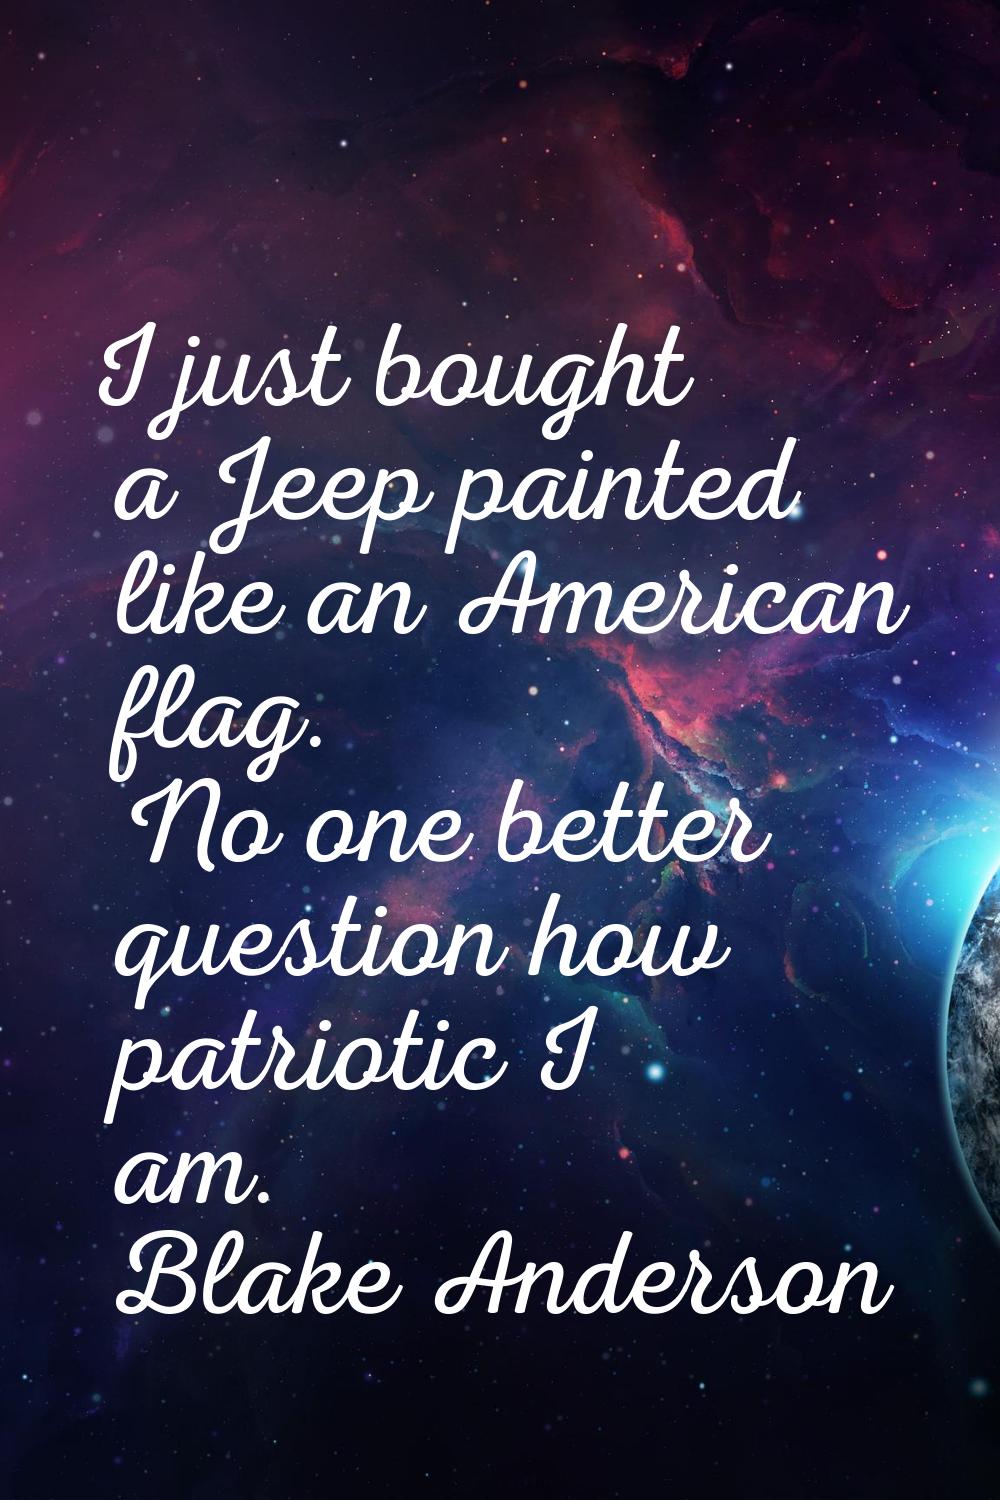 I just bought a Jeep painted like an American flag. No one better question how patriotic I am.